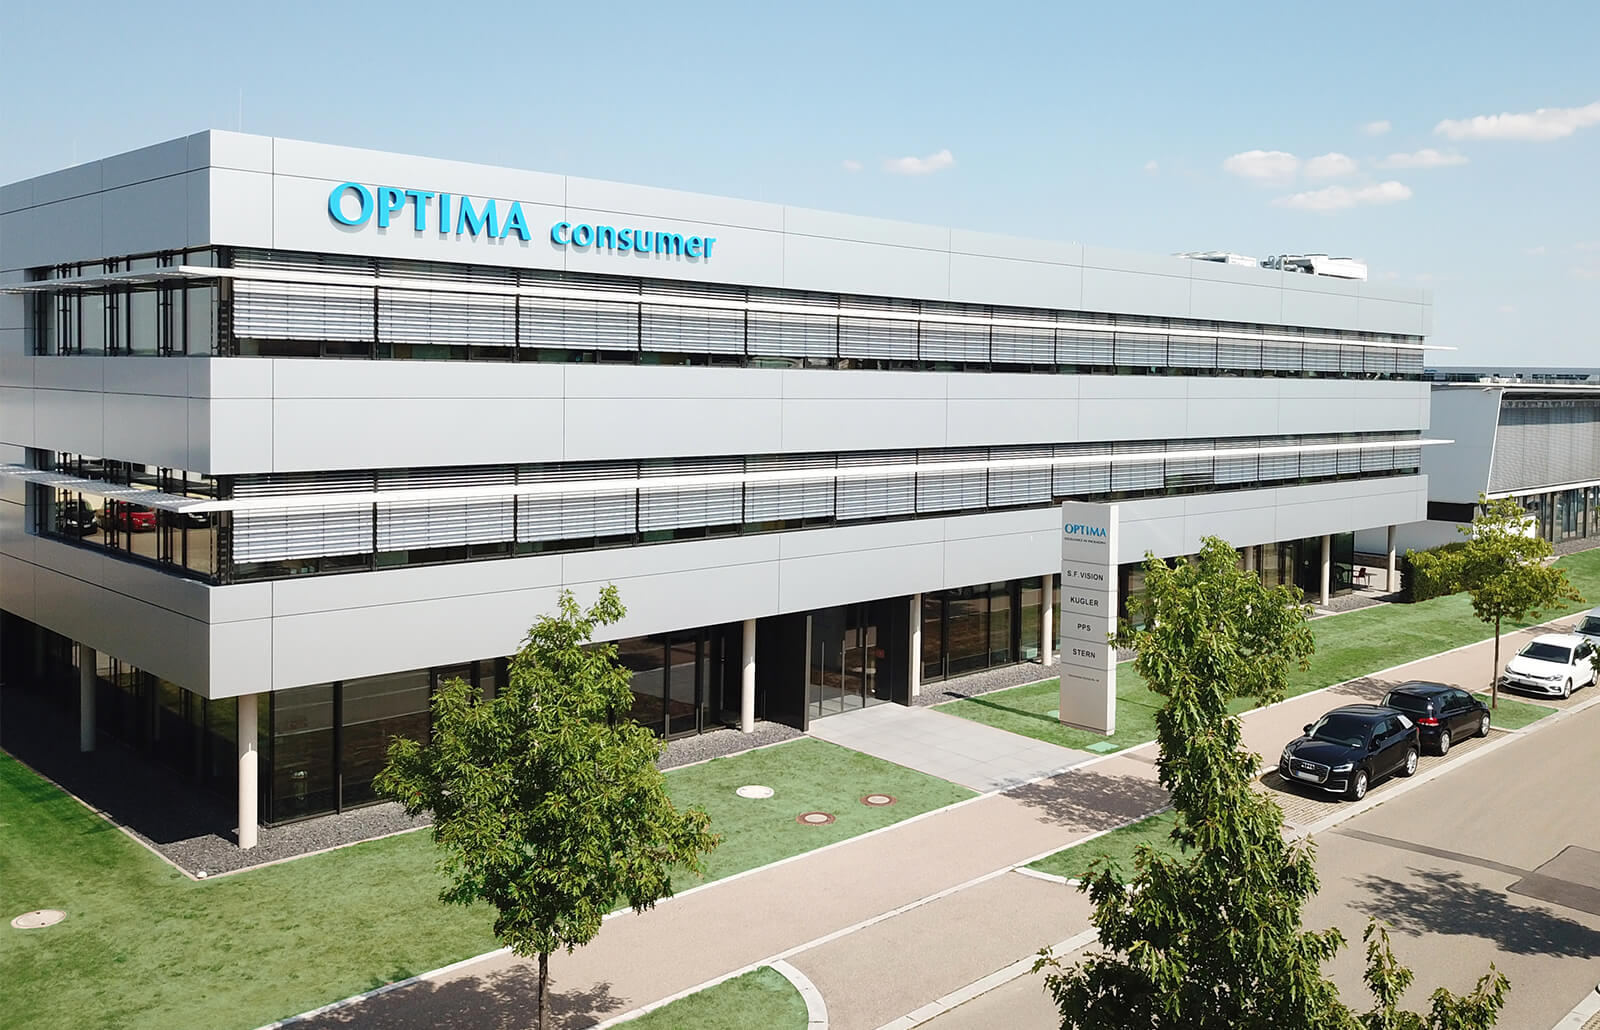 100 YEARS OF OPTIMA - the Room future for